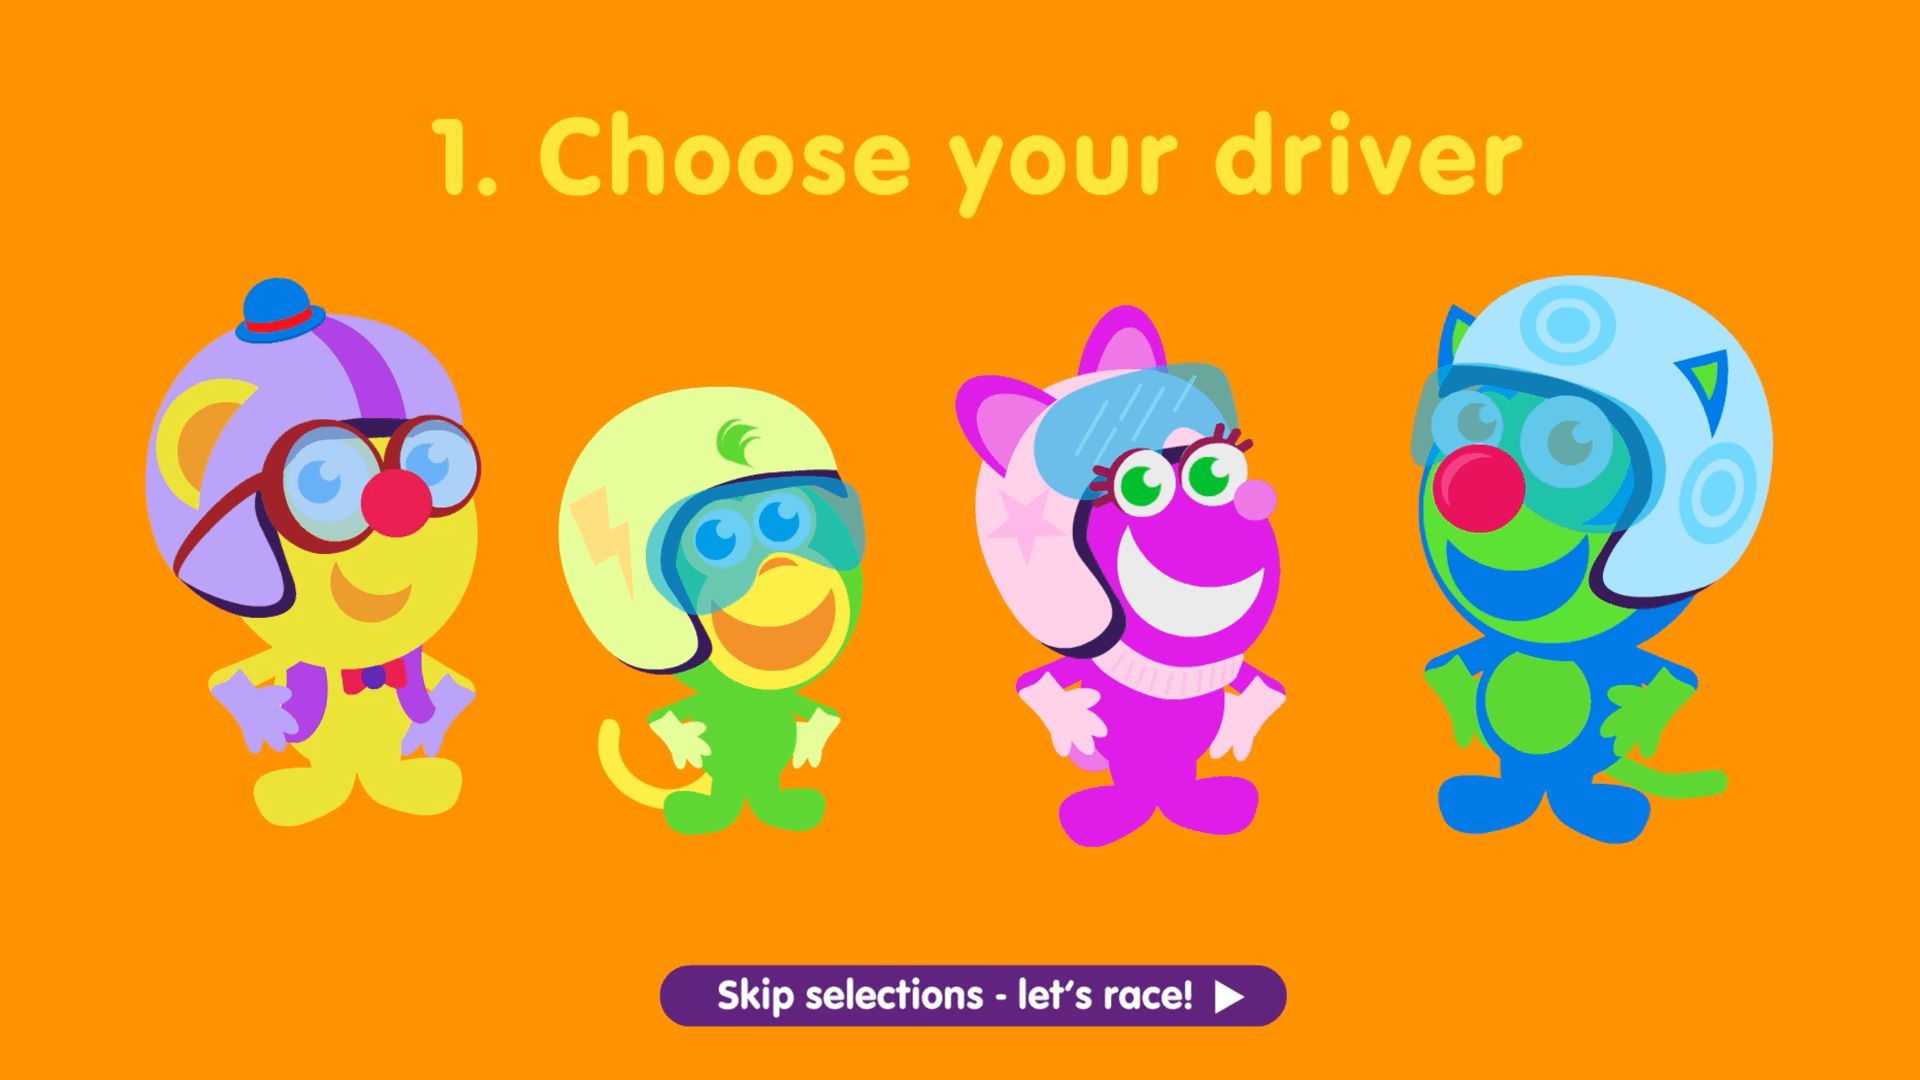 racing game, educational game, game for toddlers, learn numbers, learn counting, car race, choose car driver